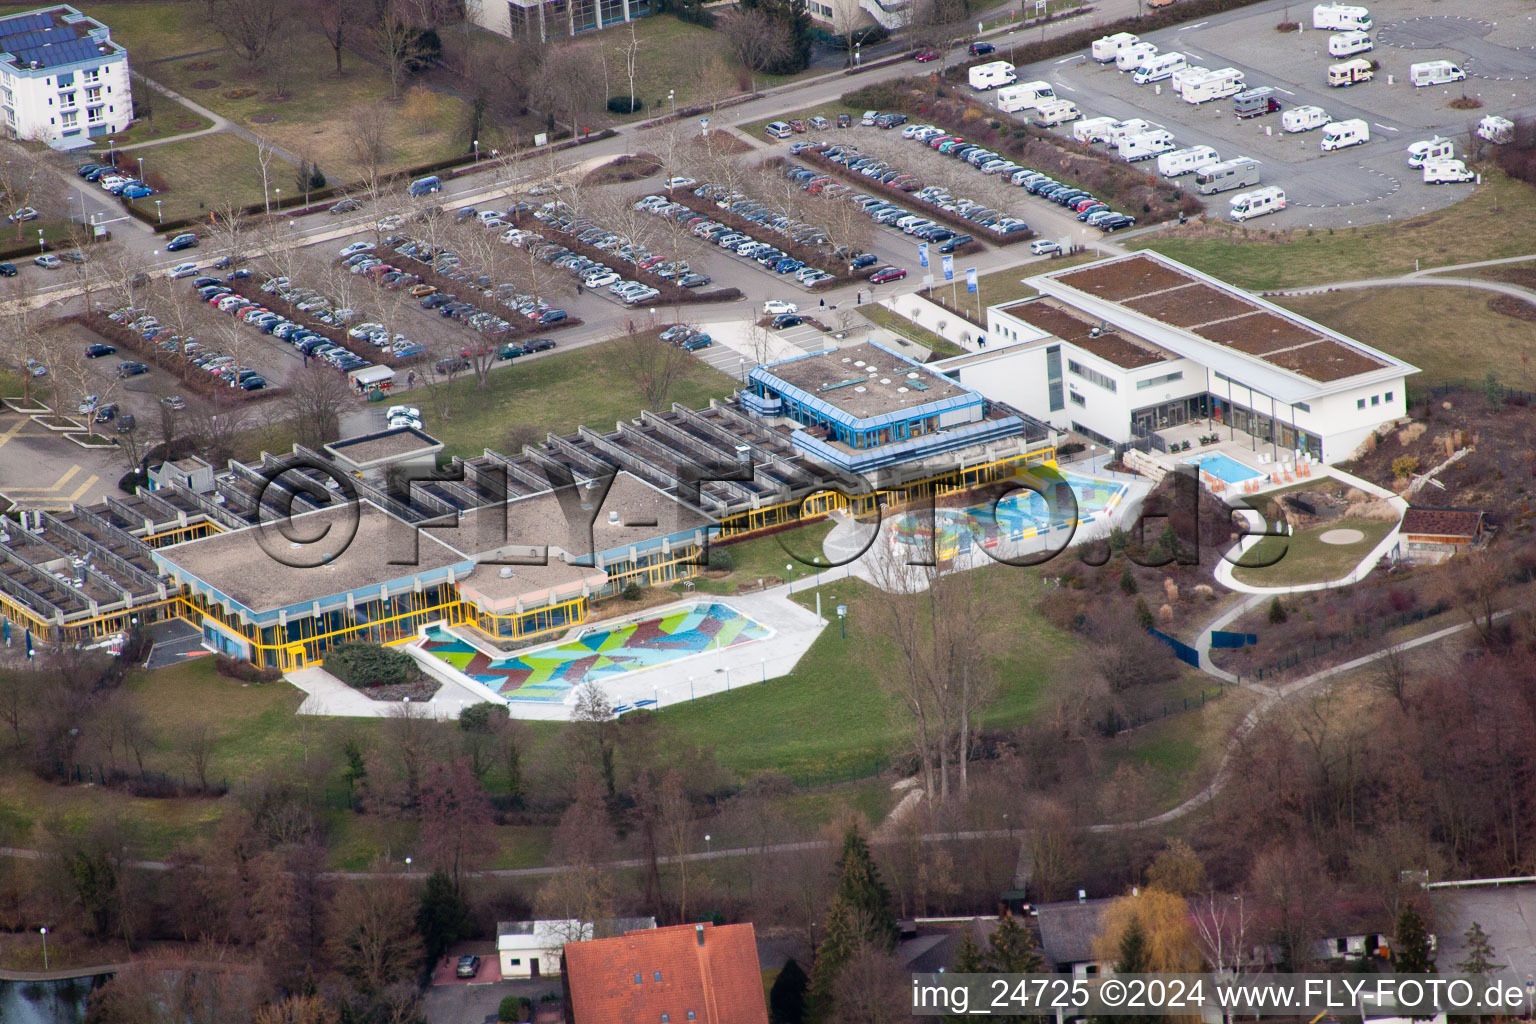 Spa and swimming pools at the swimming pool of the leisure facility Thermarium in the district Mingolsheim in Bad Schoenborn in the state Baden-Wurttemberg